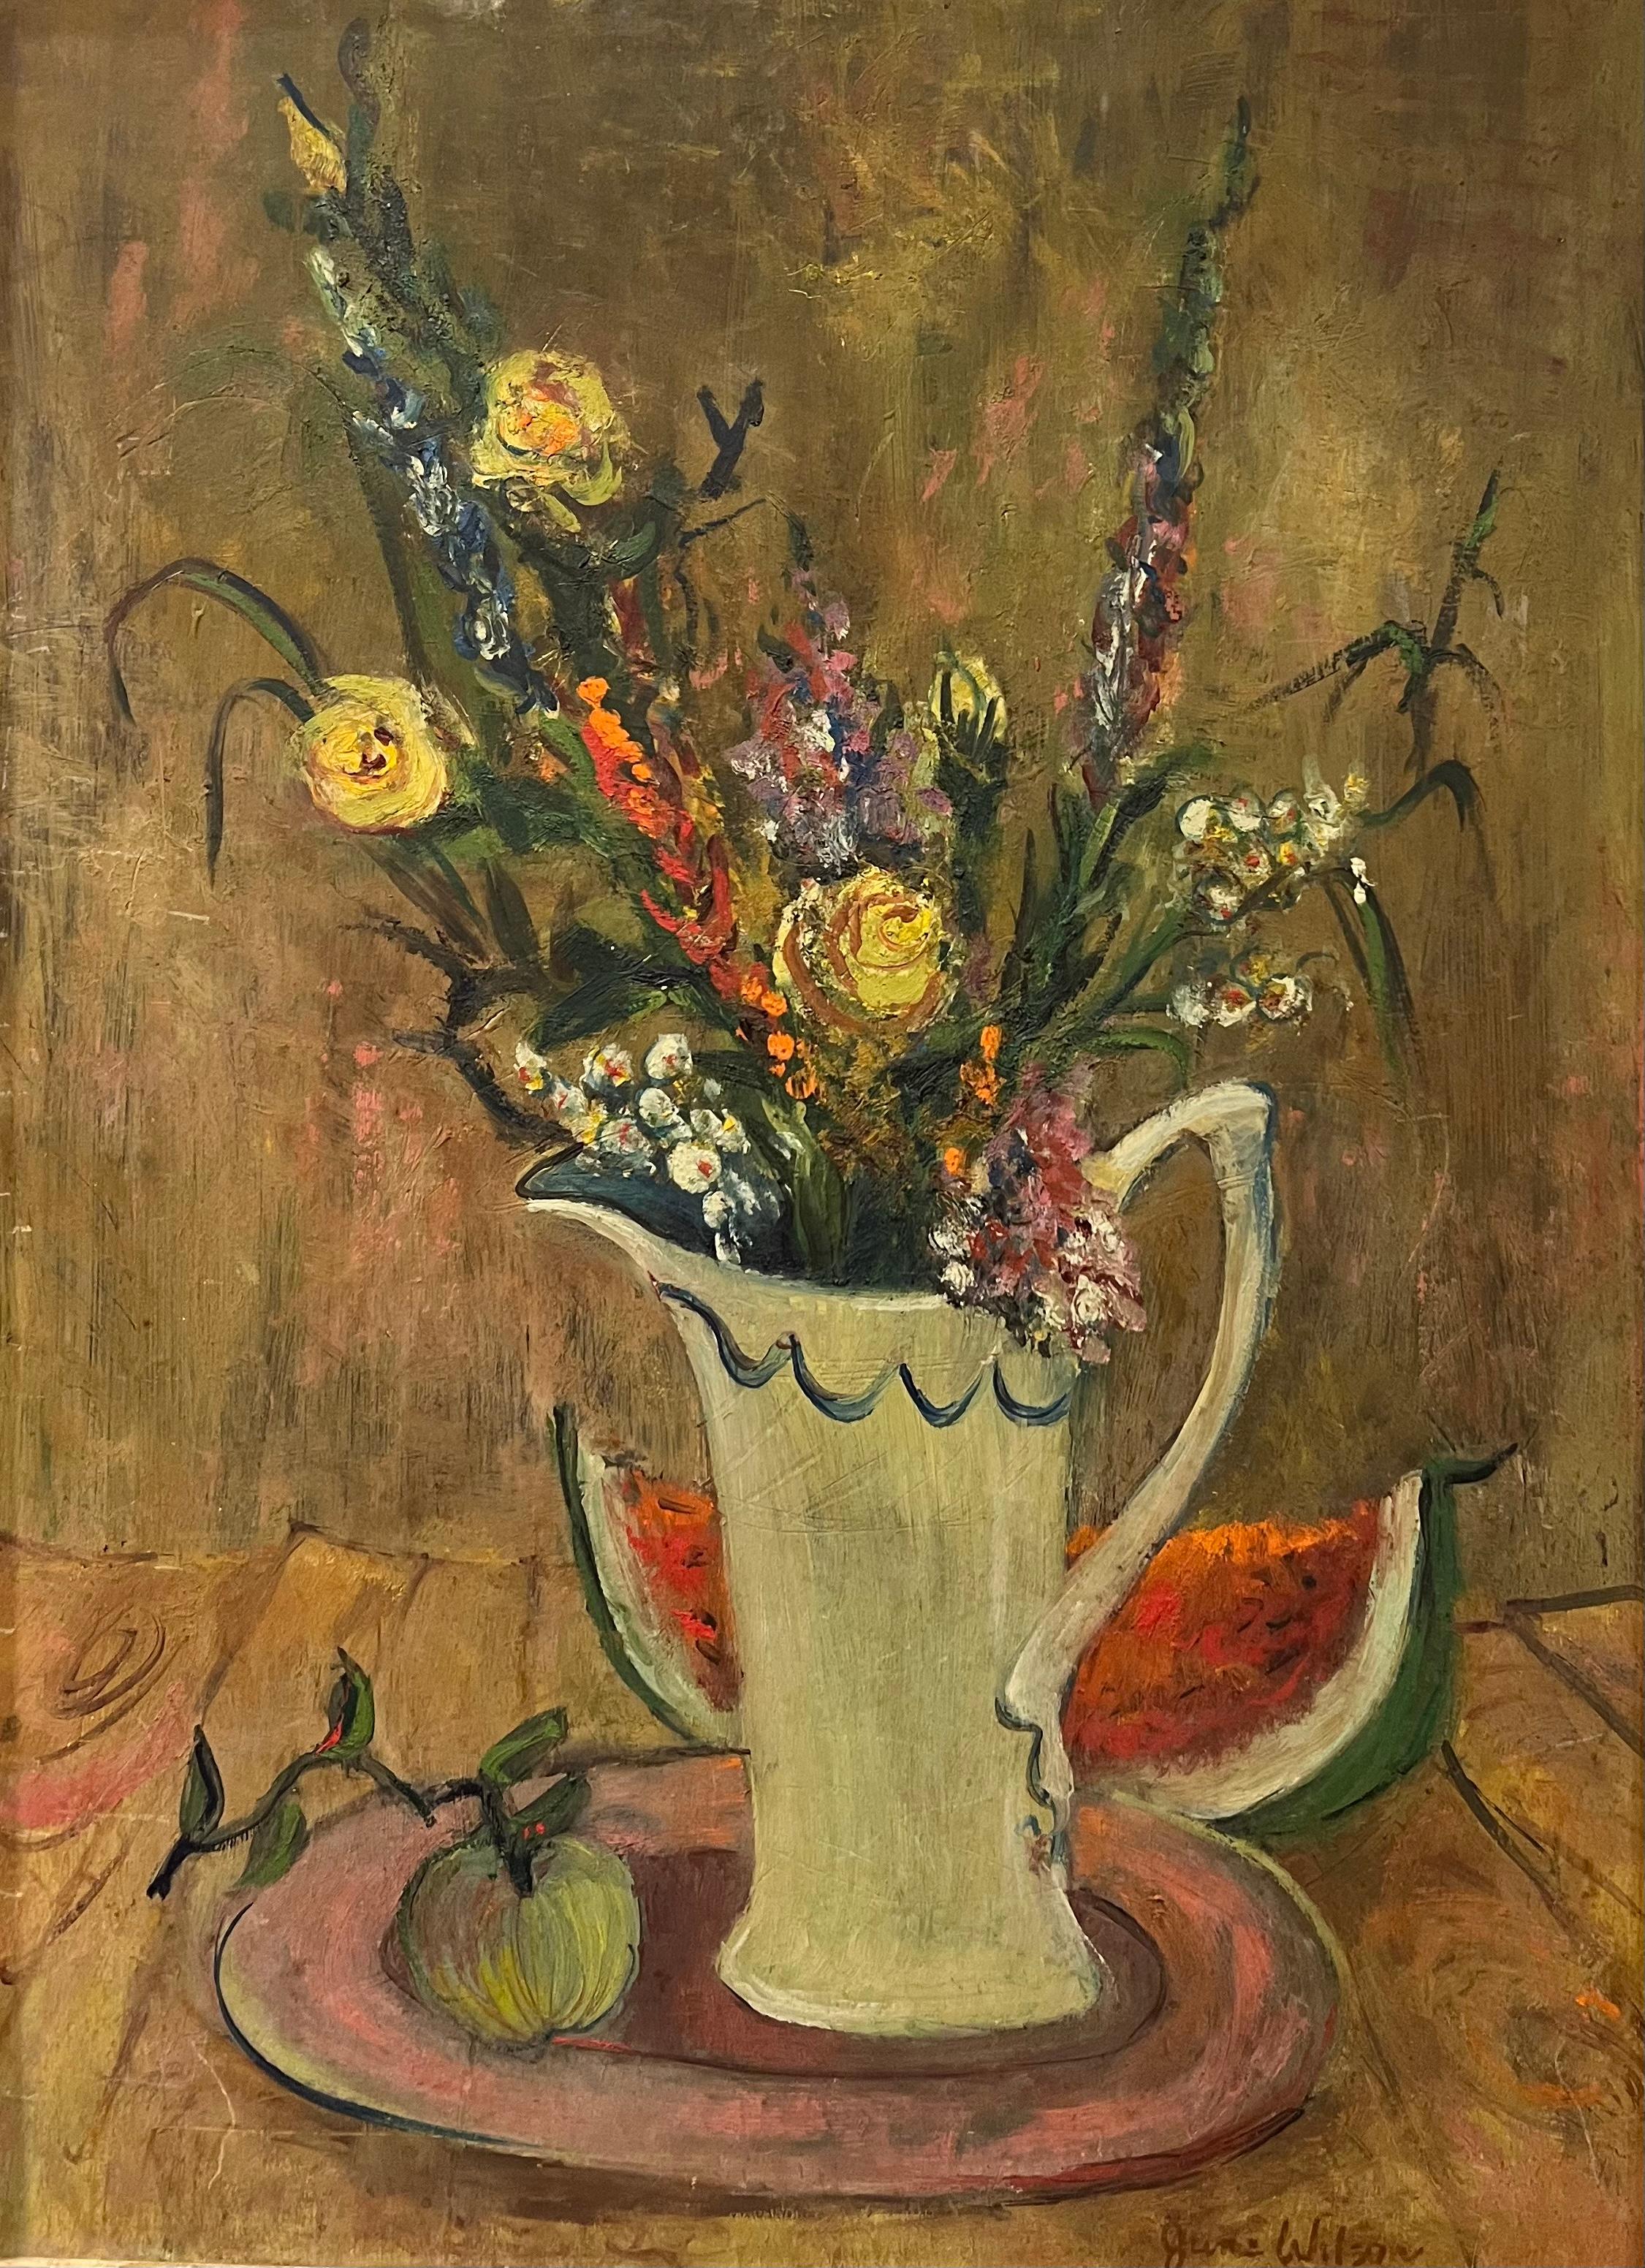 FAUVIST Still Life Flowers Fruits FEMALE American Modernist Post Impressionist - Painting by Jane Wilson